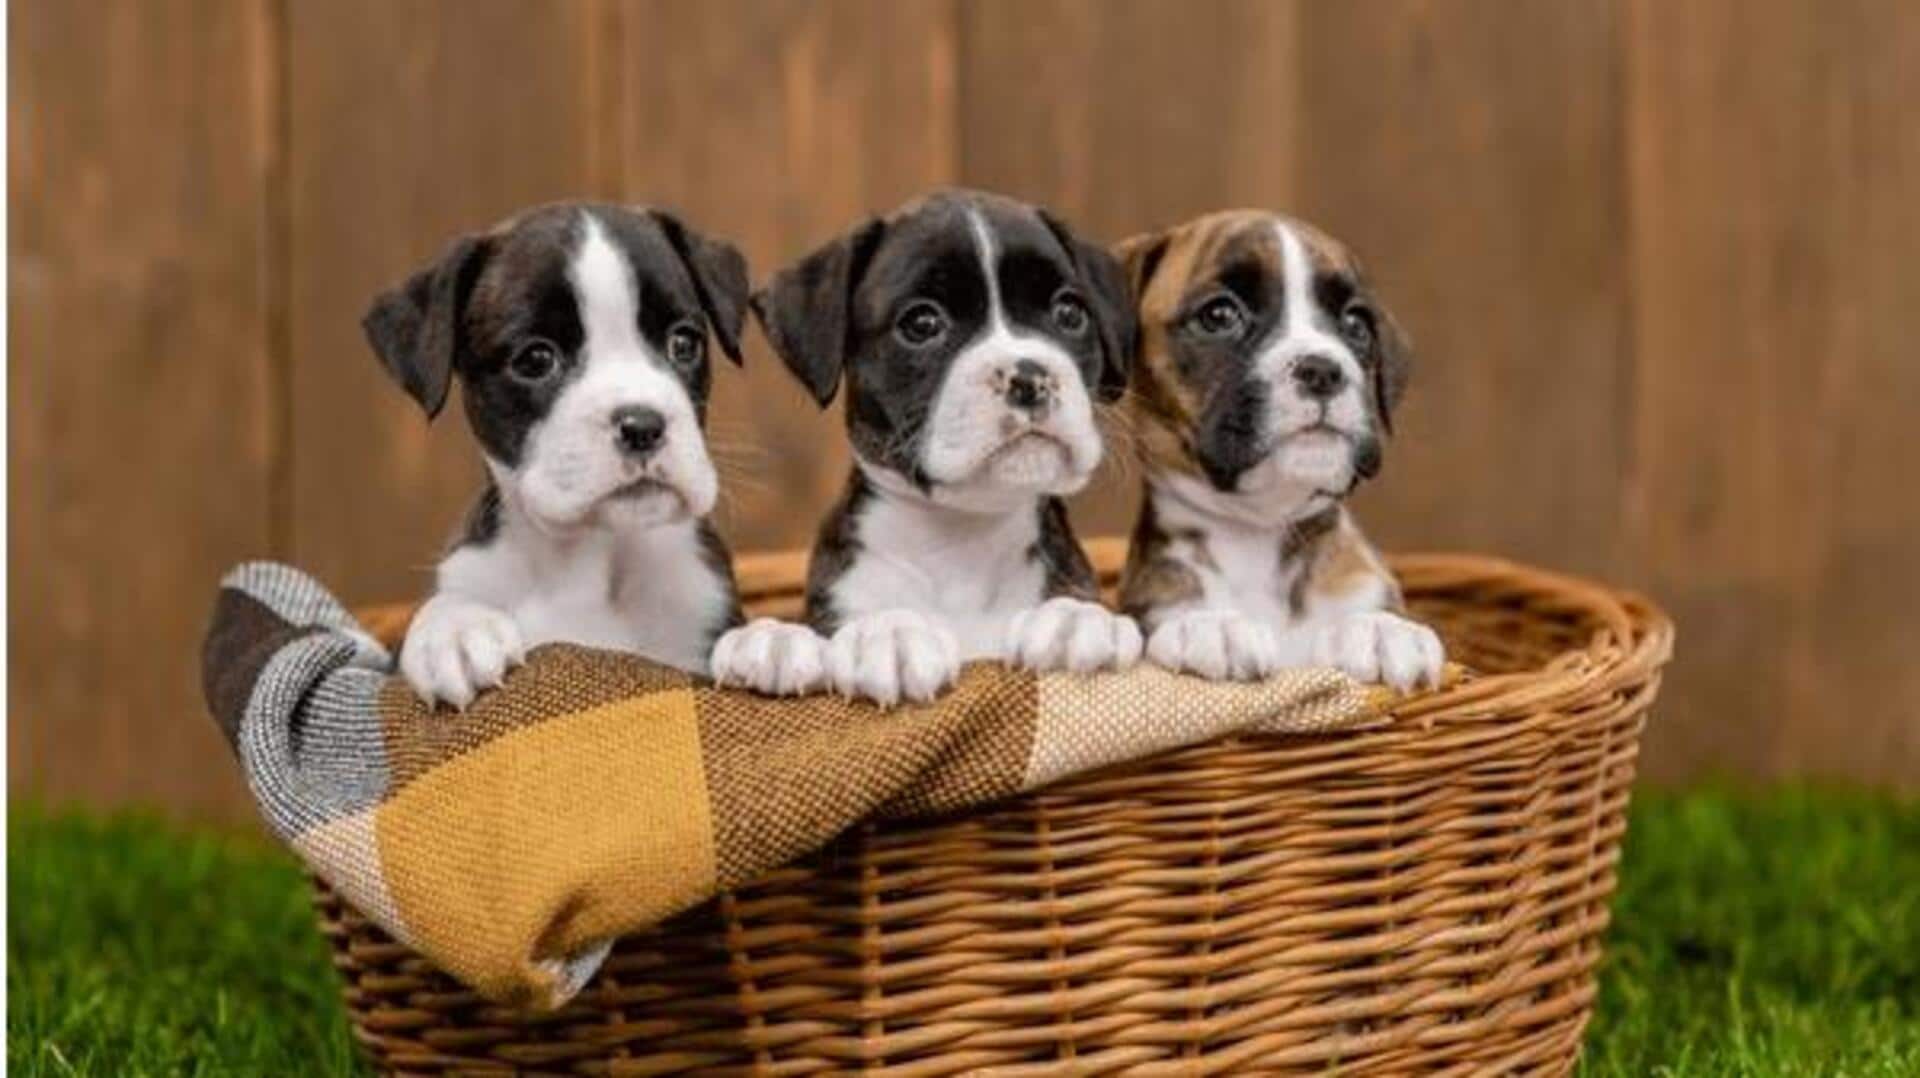 Boxer puppy socialization tips their owners should know